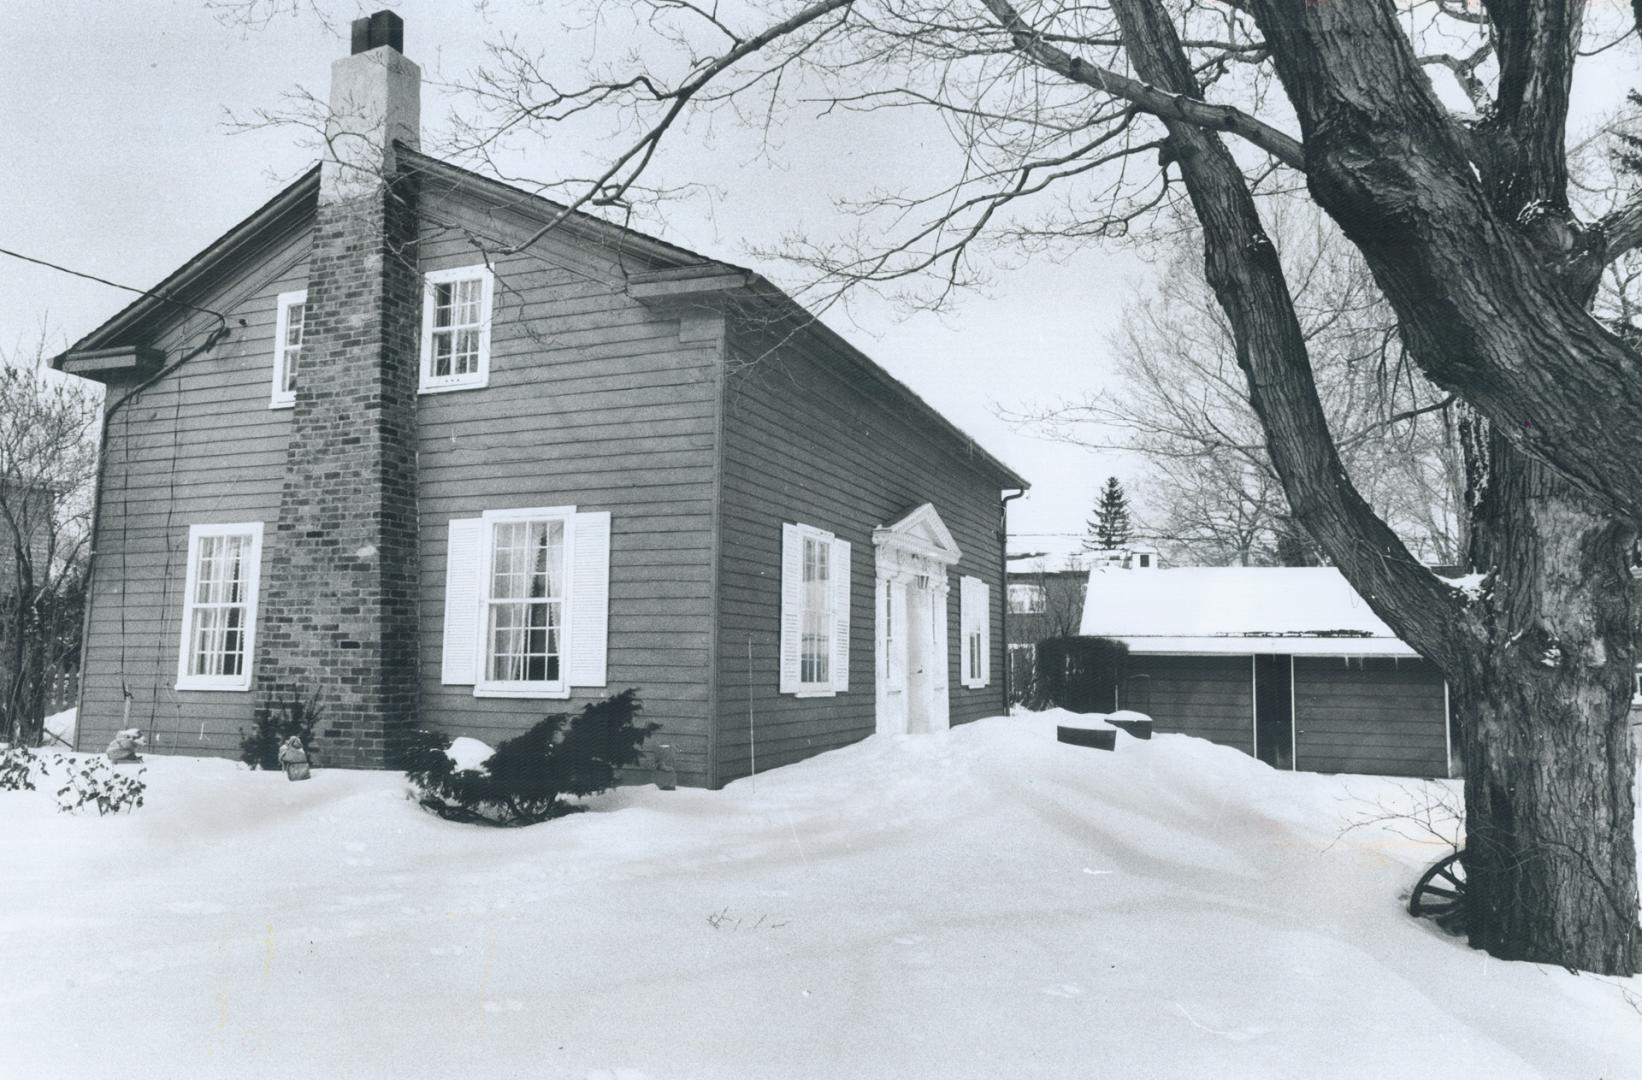 Walker home was built by North York's first settler